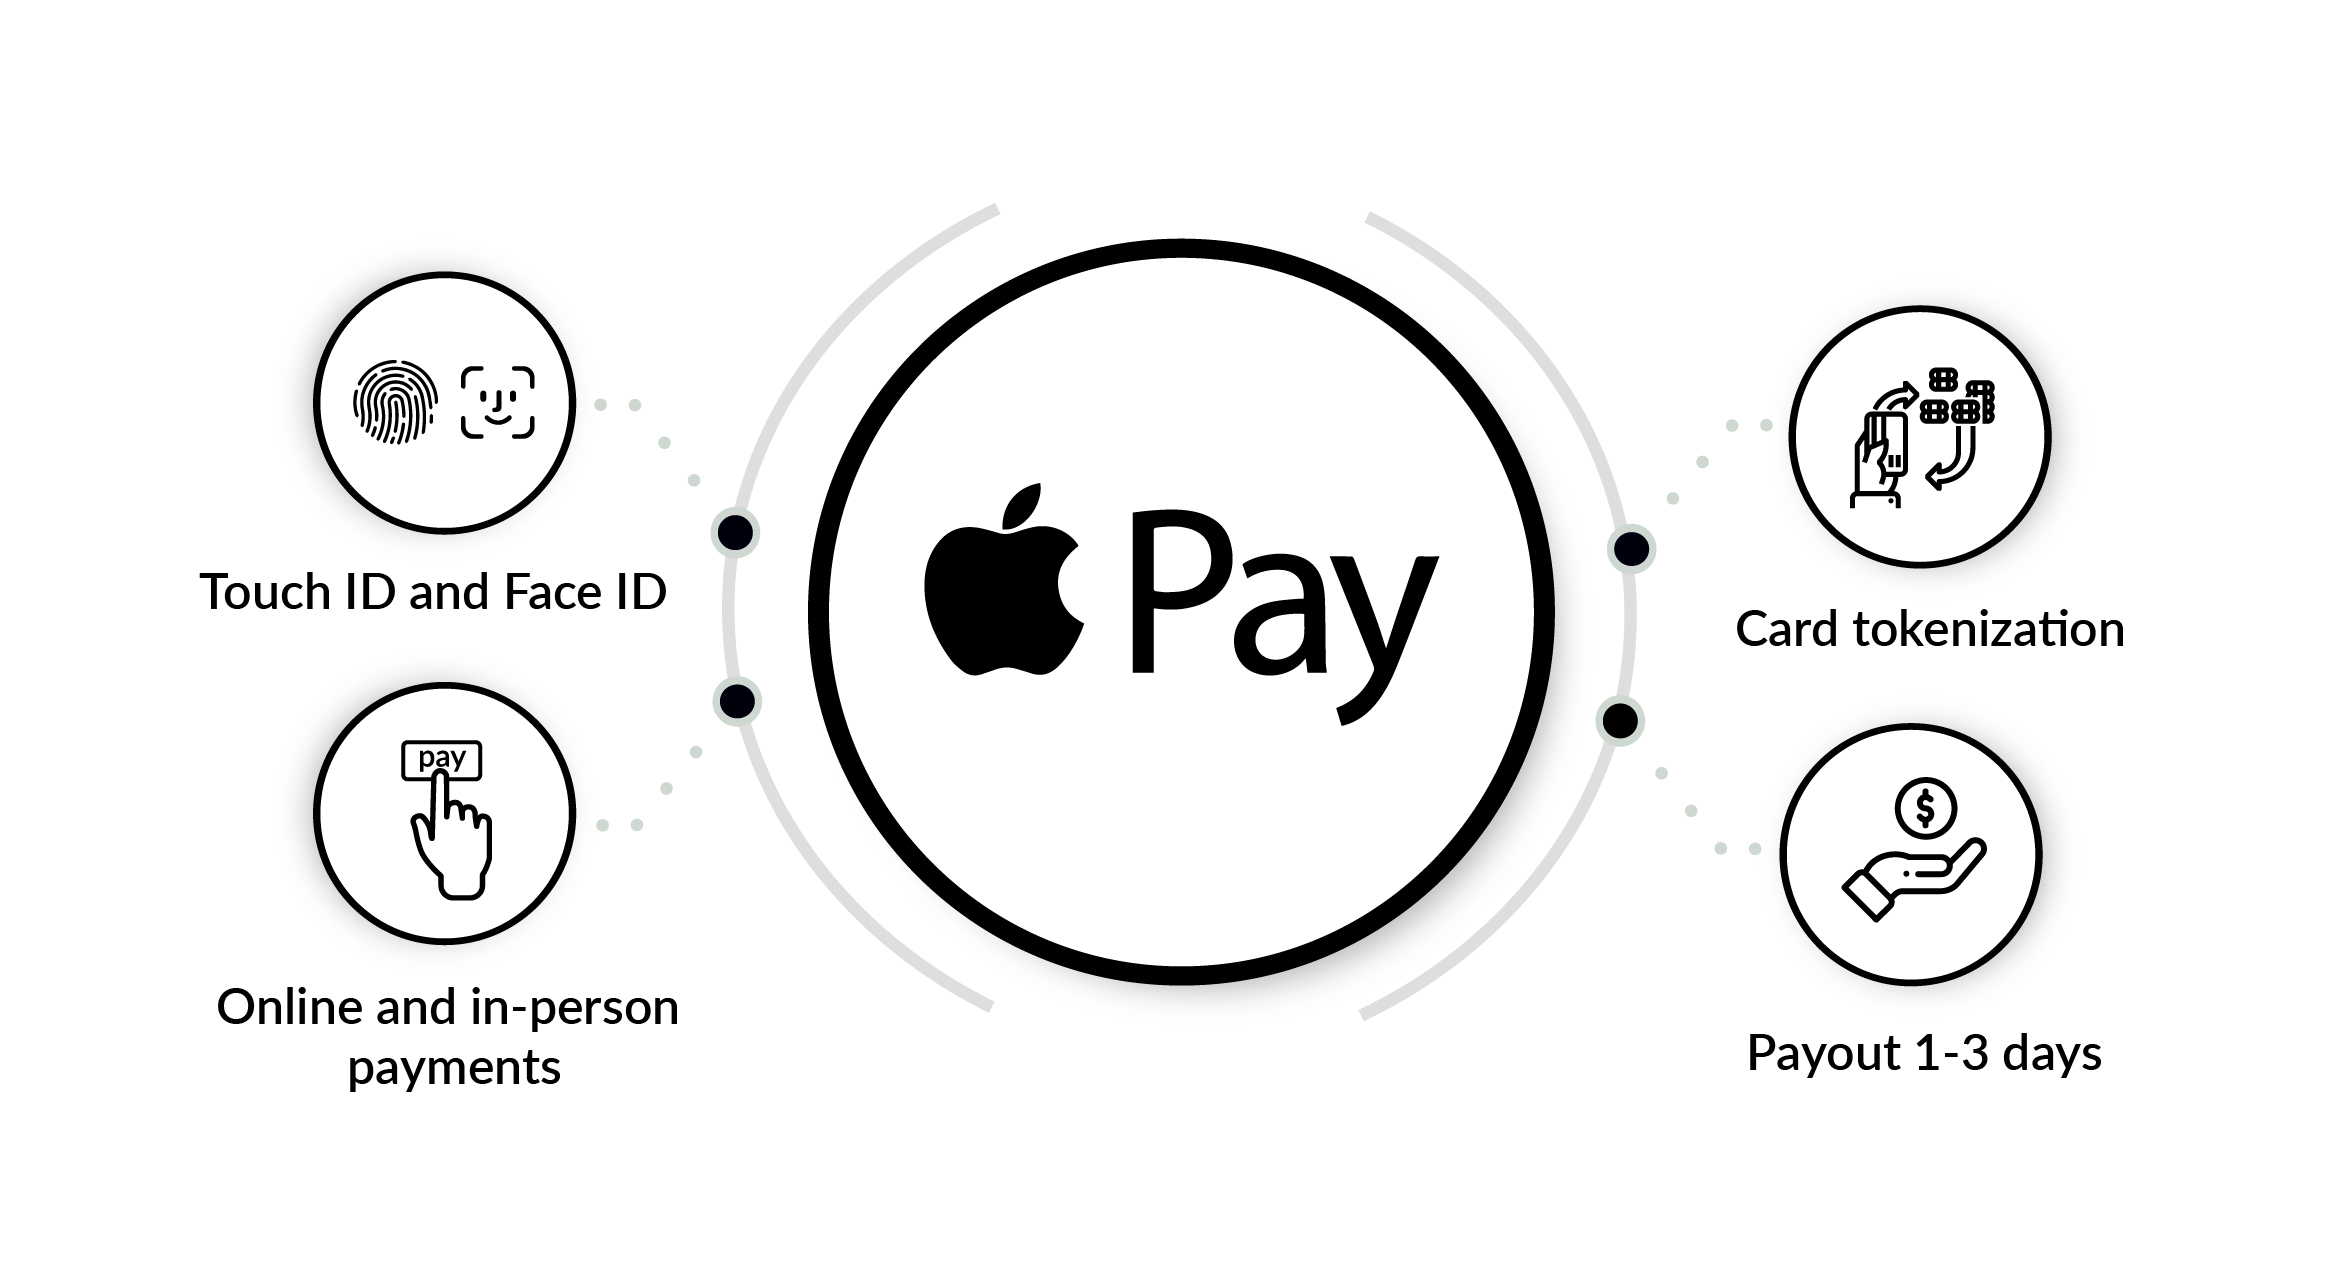 Apple Pay features